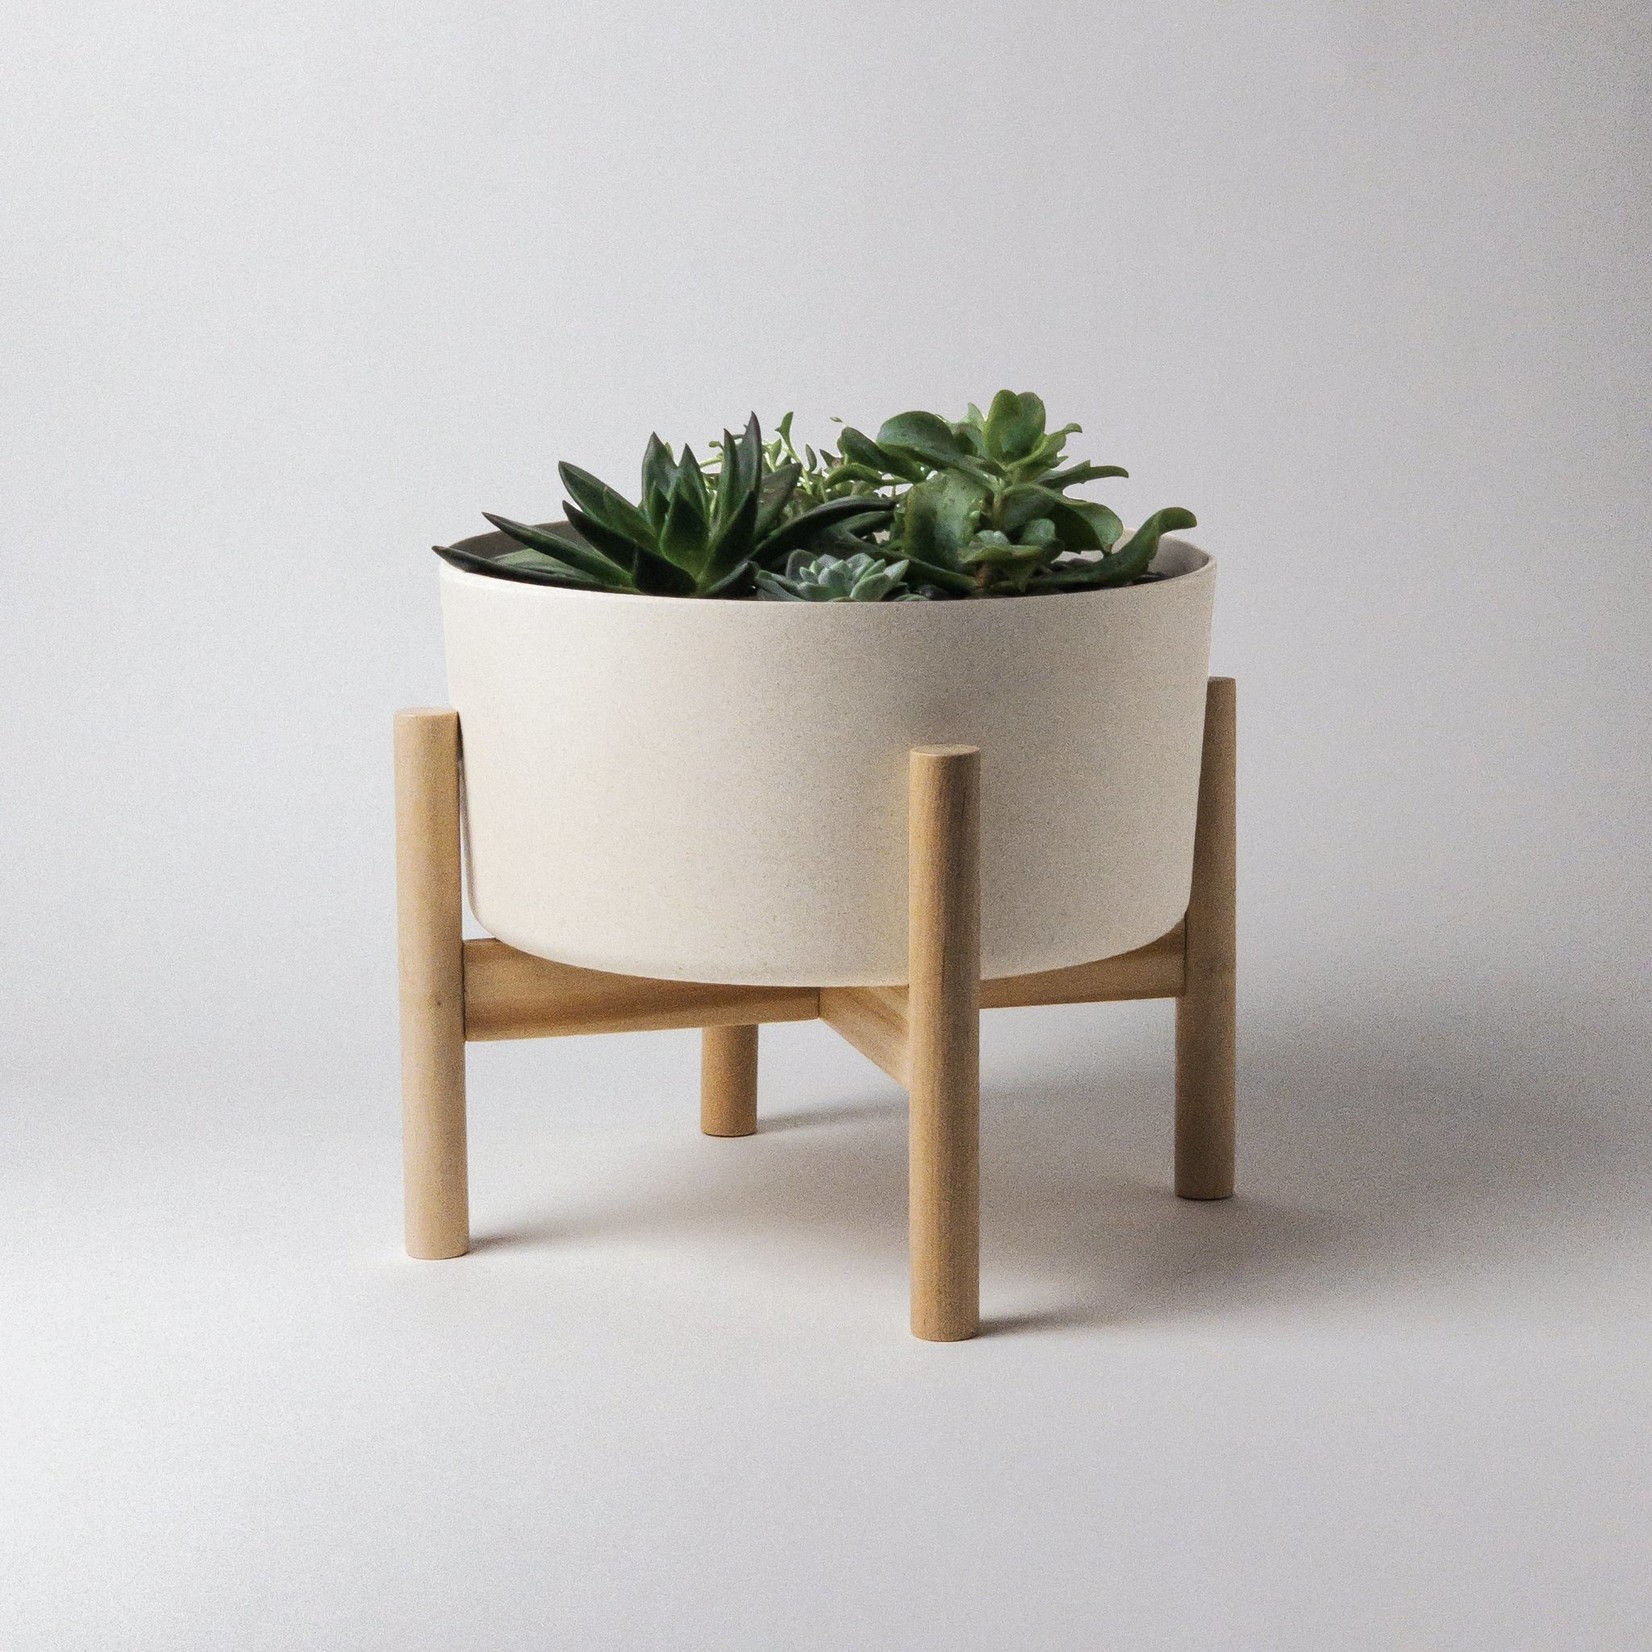 Kanso Designs Bamboo Fibre Wide Planter and Stand - 9"